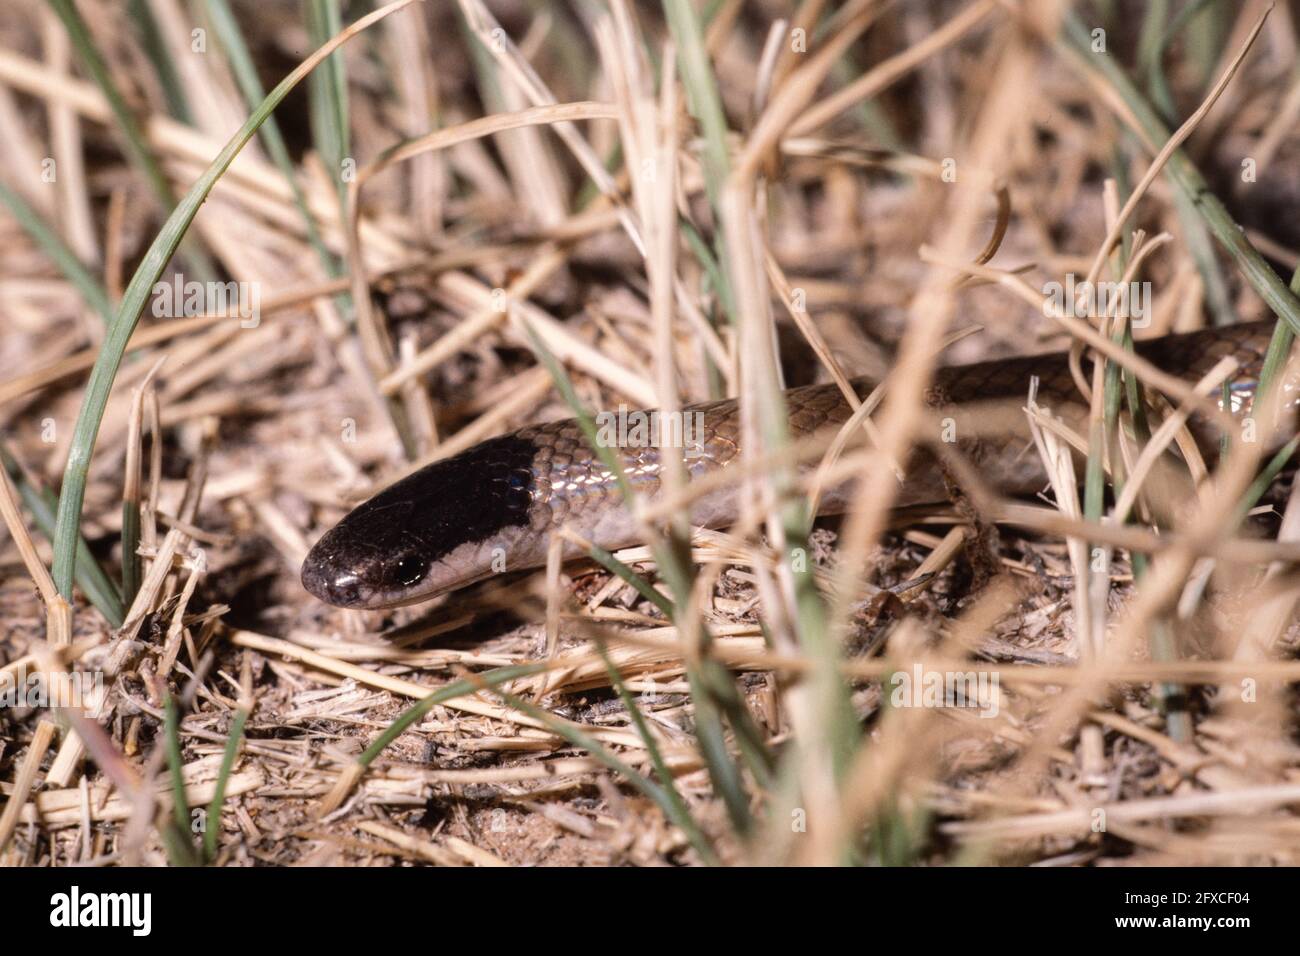 The Plains Black-headed Snake is a small, harmless snake usually found in rocky or grassy plains in the southwestern U.S. Stock Photo